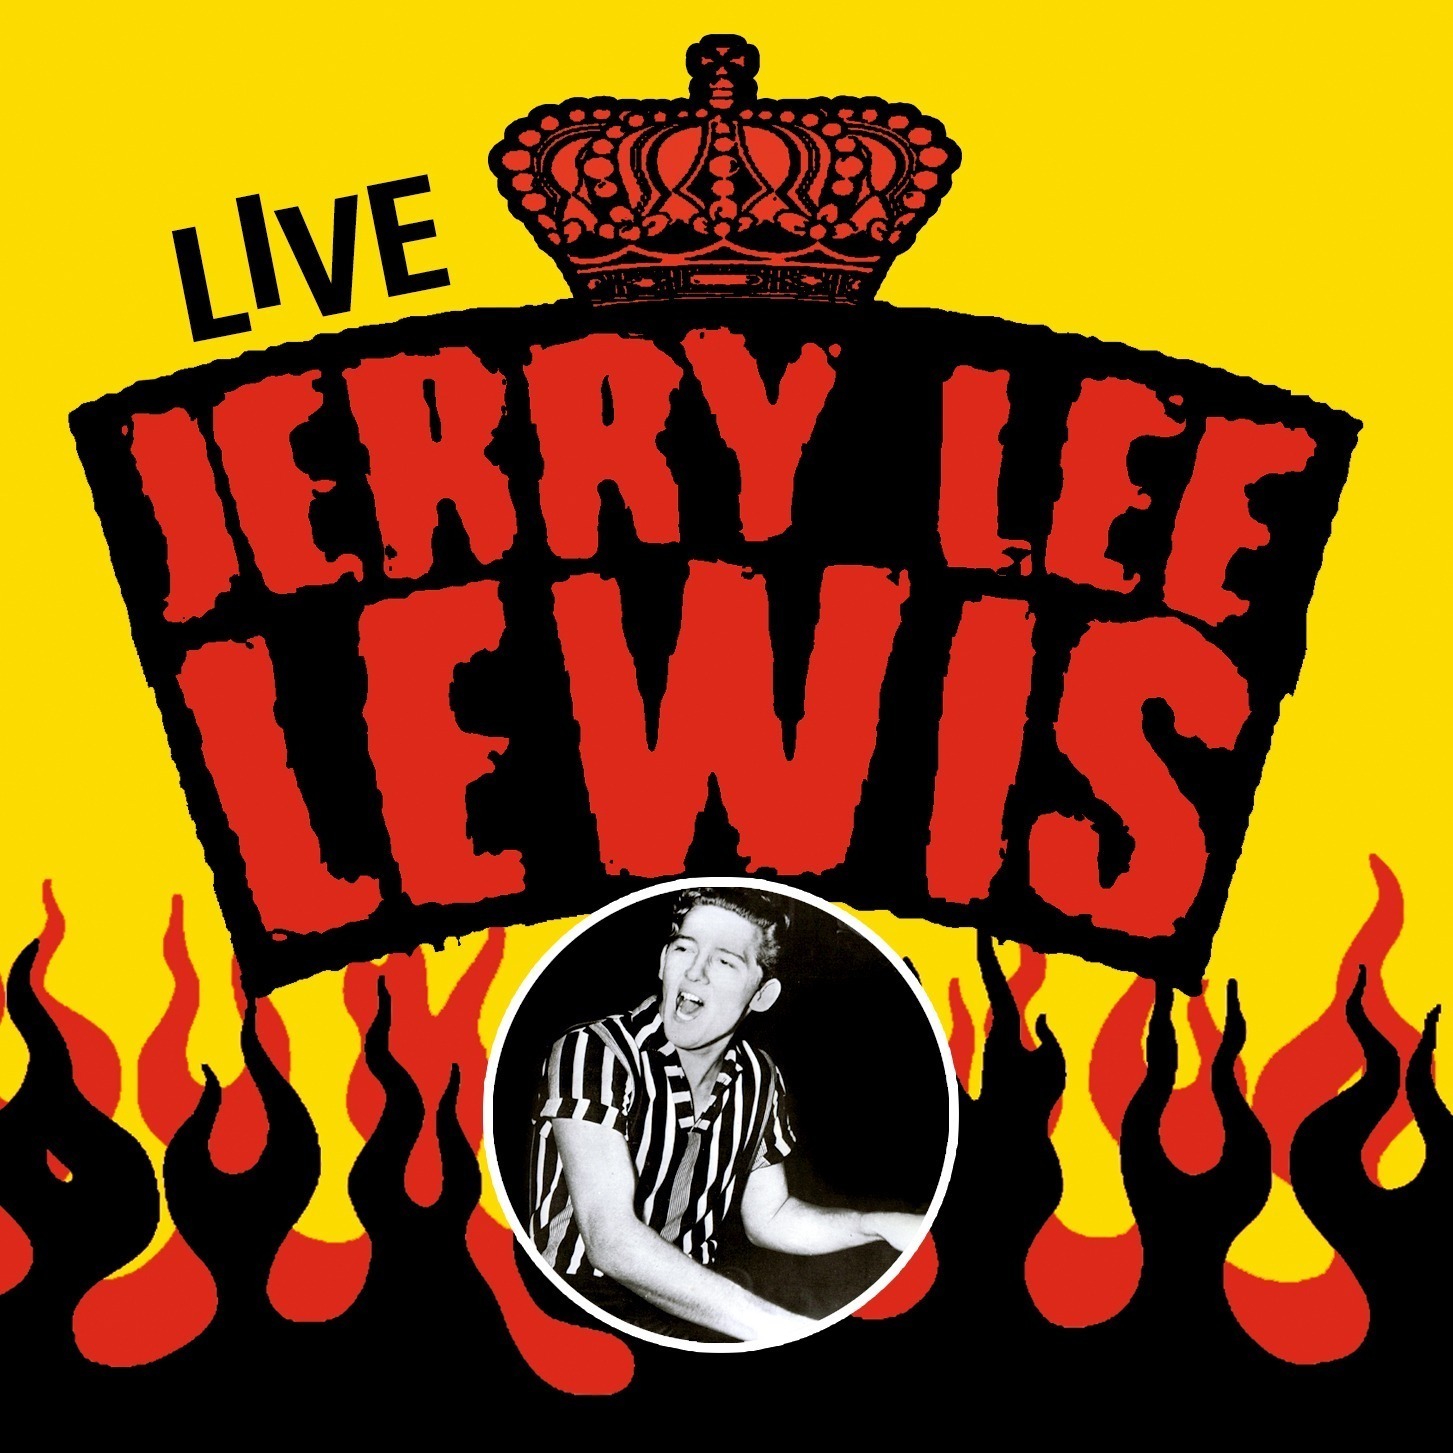 ZYX　LEWIS　JERRY　Live　LEE　Music